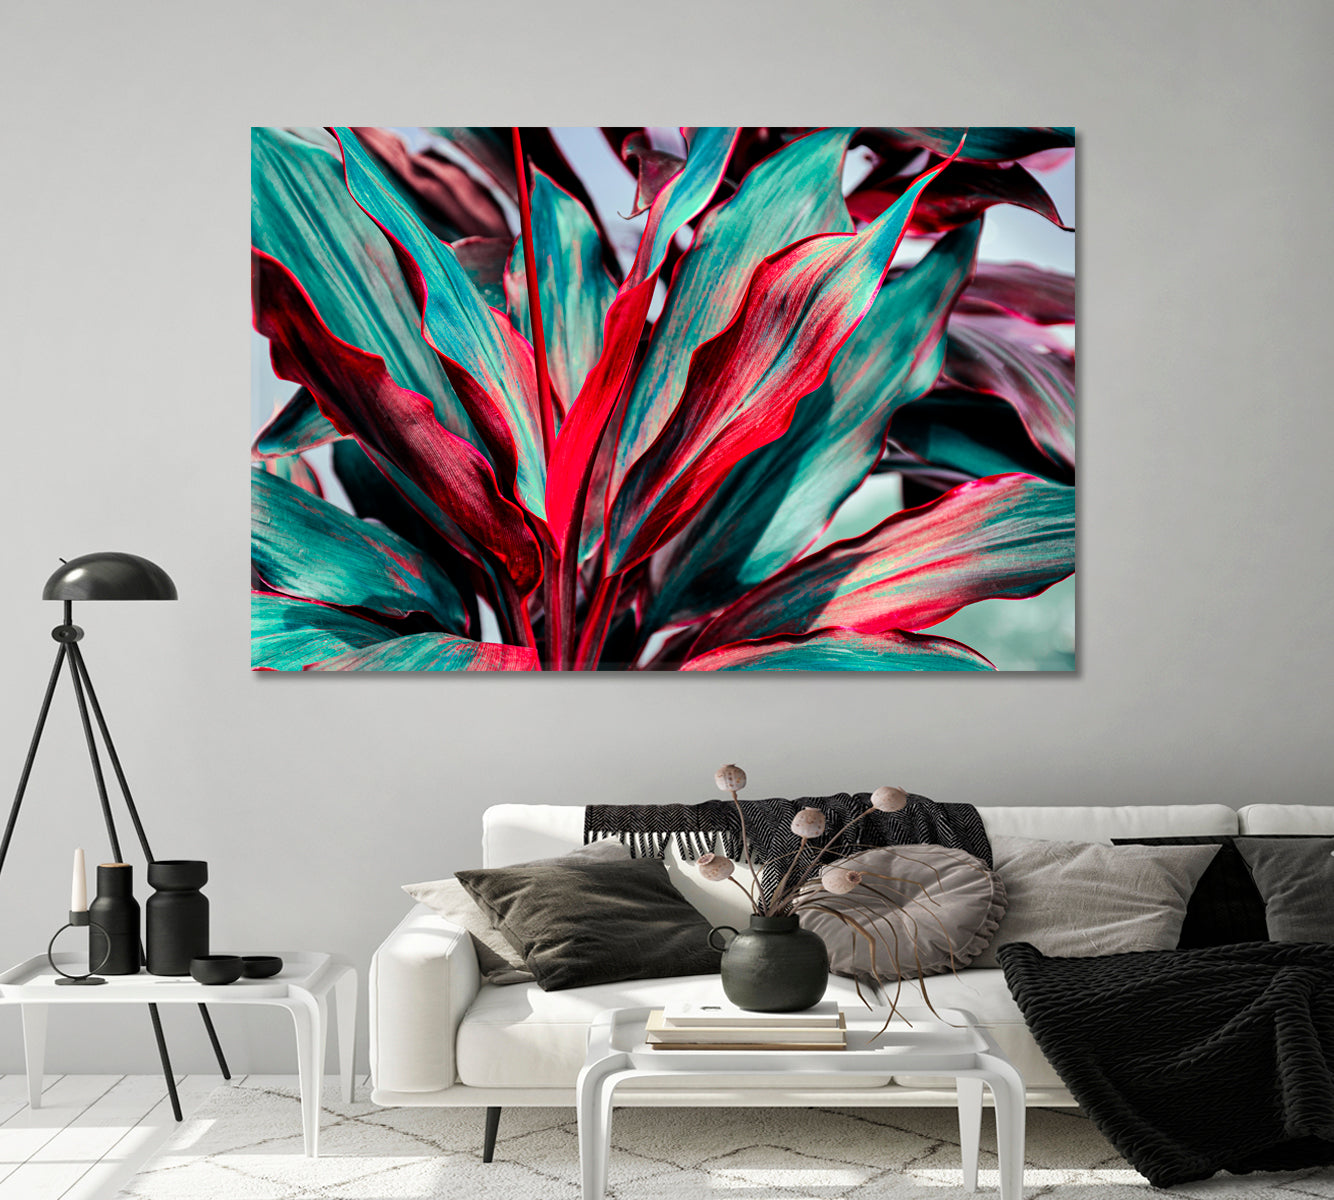 Red And Green Tropical Leaves Canvas Print-Canvas Print-CetArt-1 Panel-24x16 inches-CetArt